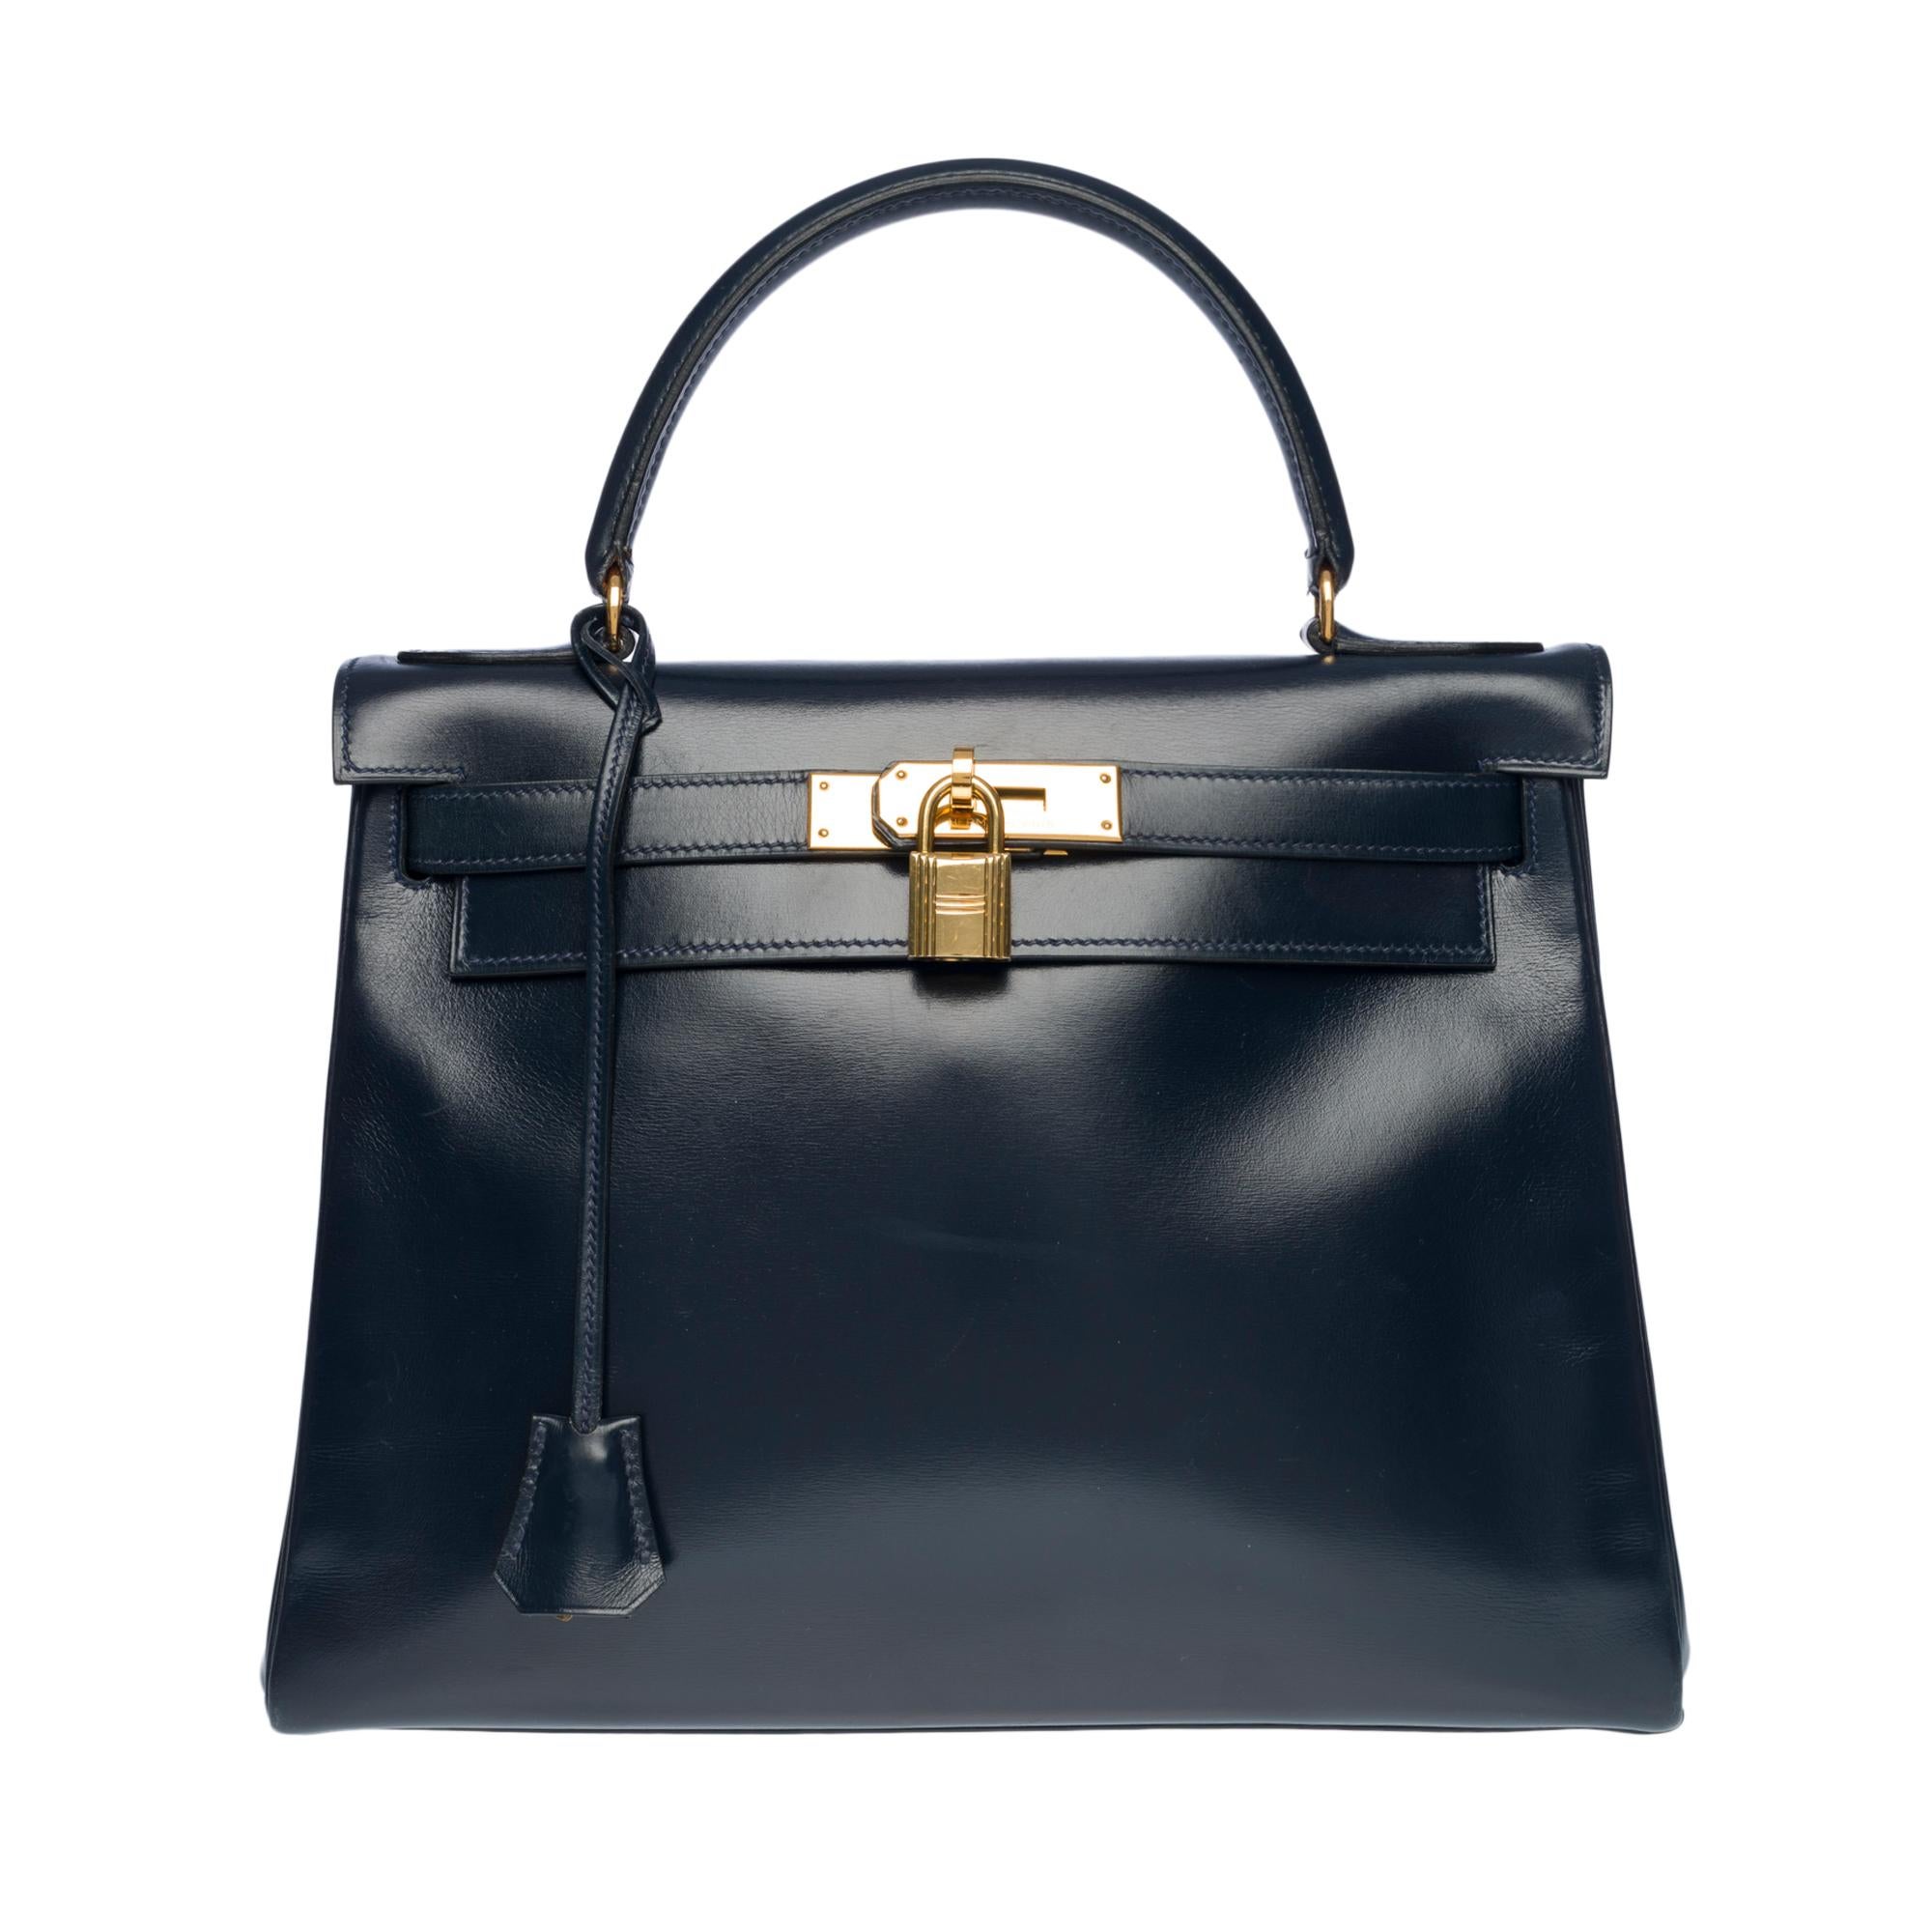 Exceptional Hermes Kelly 28 retourne handbag with double shoulder straps (classic navy blue box leather shoulder strap and navy blue canvas sport shoulder strap), gold plated metal hardware, simple navy blue box leather handle allowing a hand or